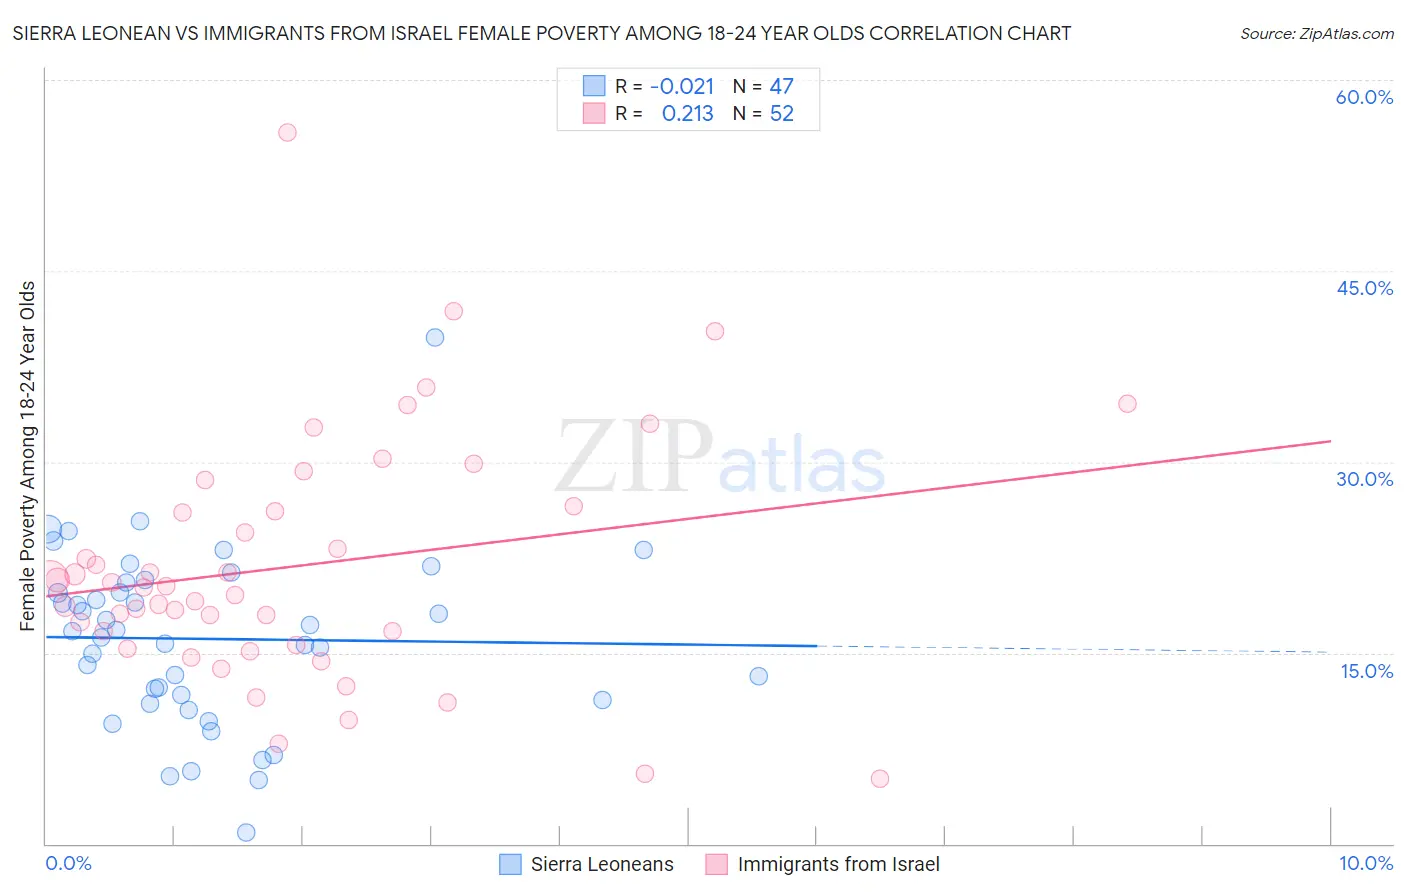 Sierra Leonean vs Immigrants from Israel Female Poverty Among 18-24 Year Olds